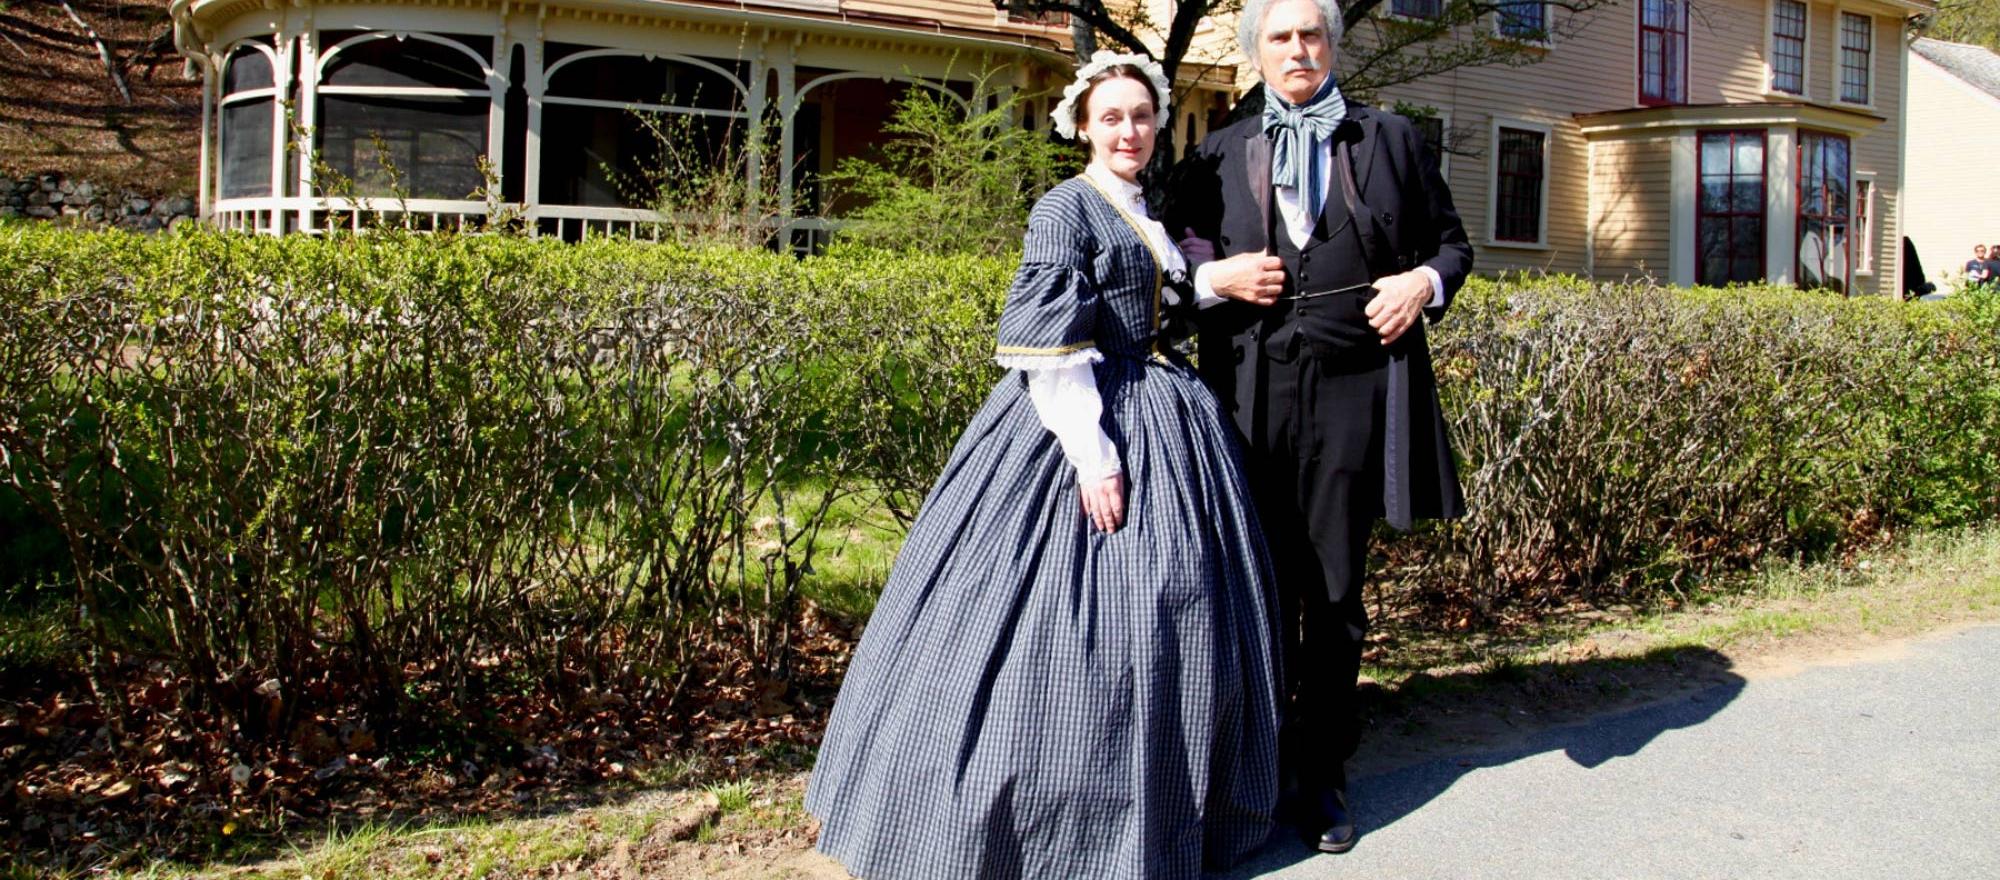 Actors portray Sophia and Nathaniel Hawthorne at his last home.